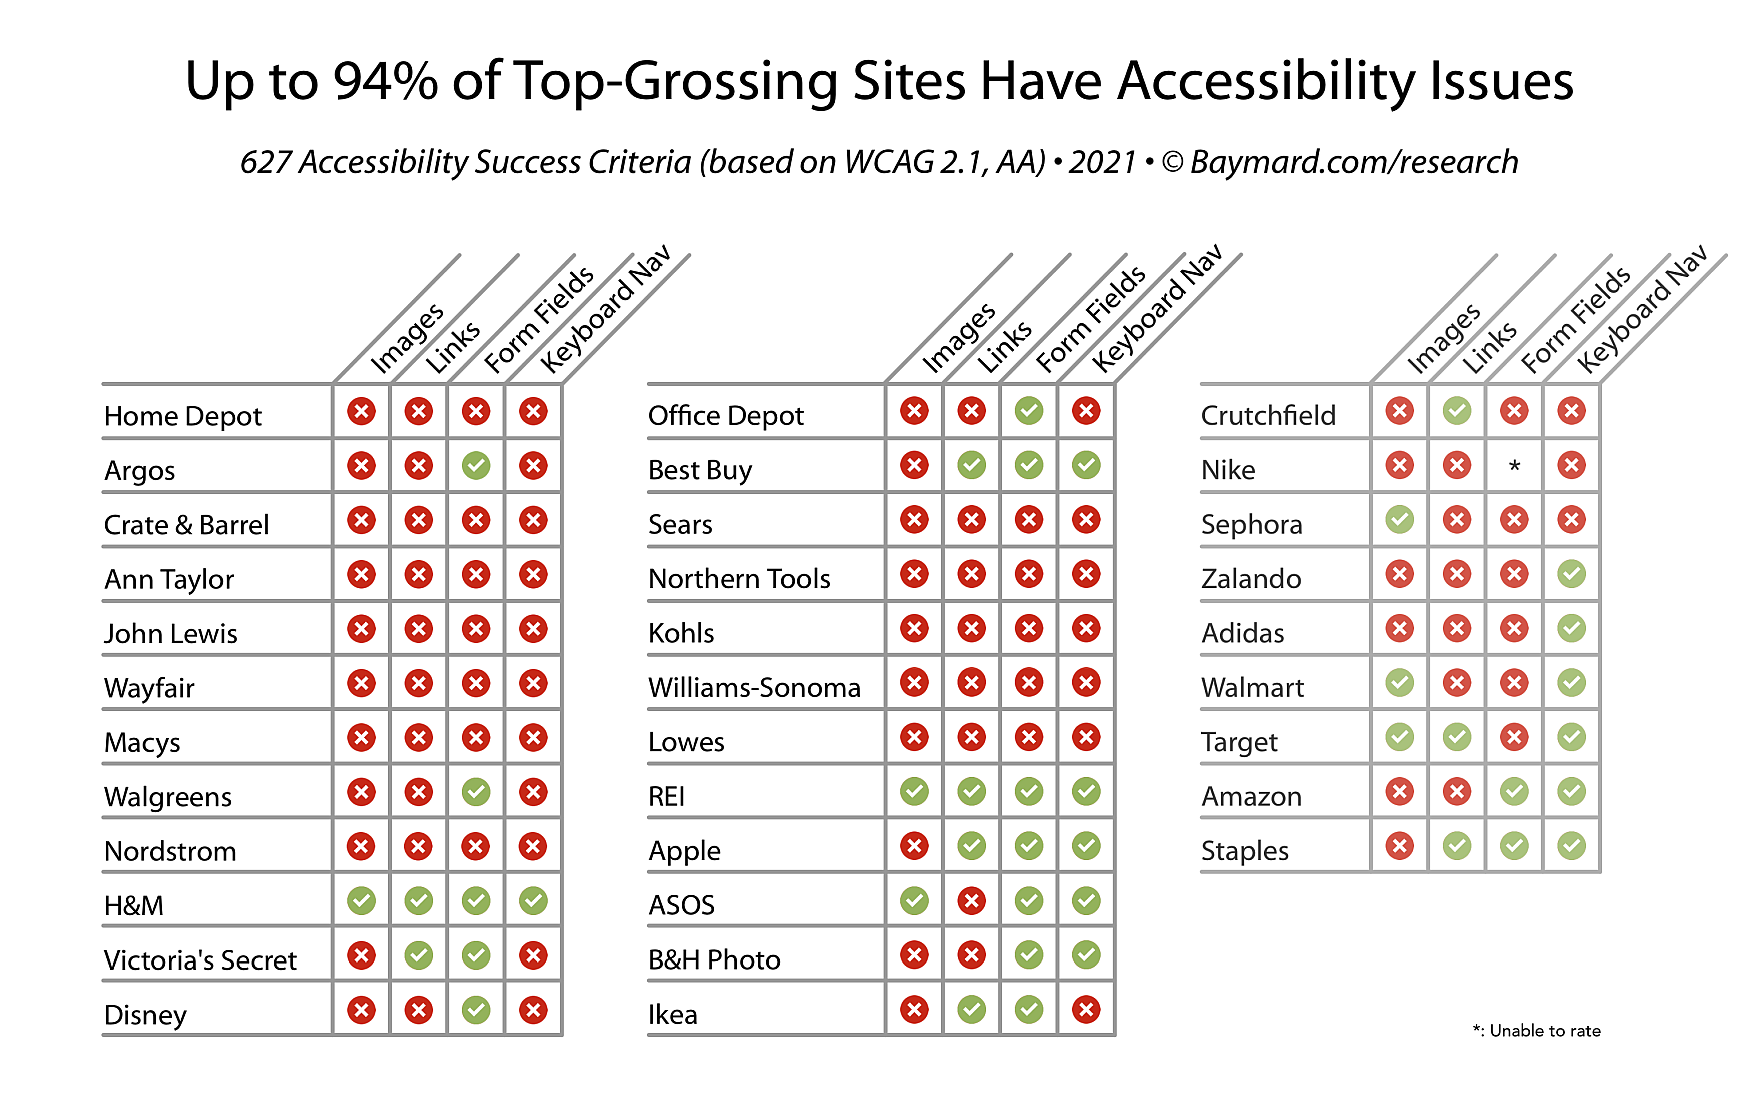 Websites with accessibility issues